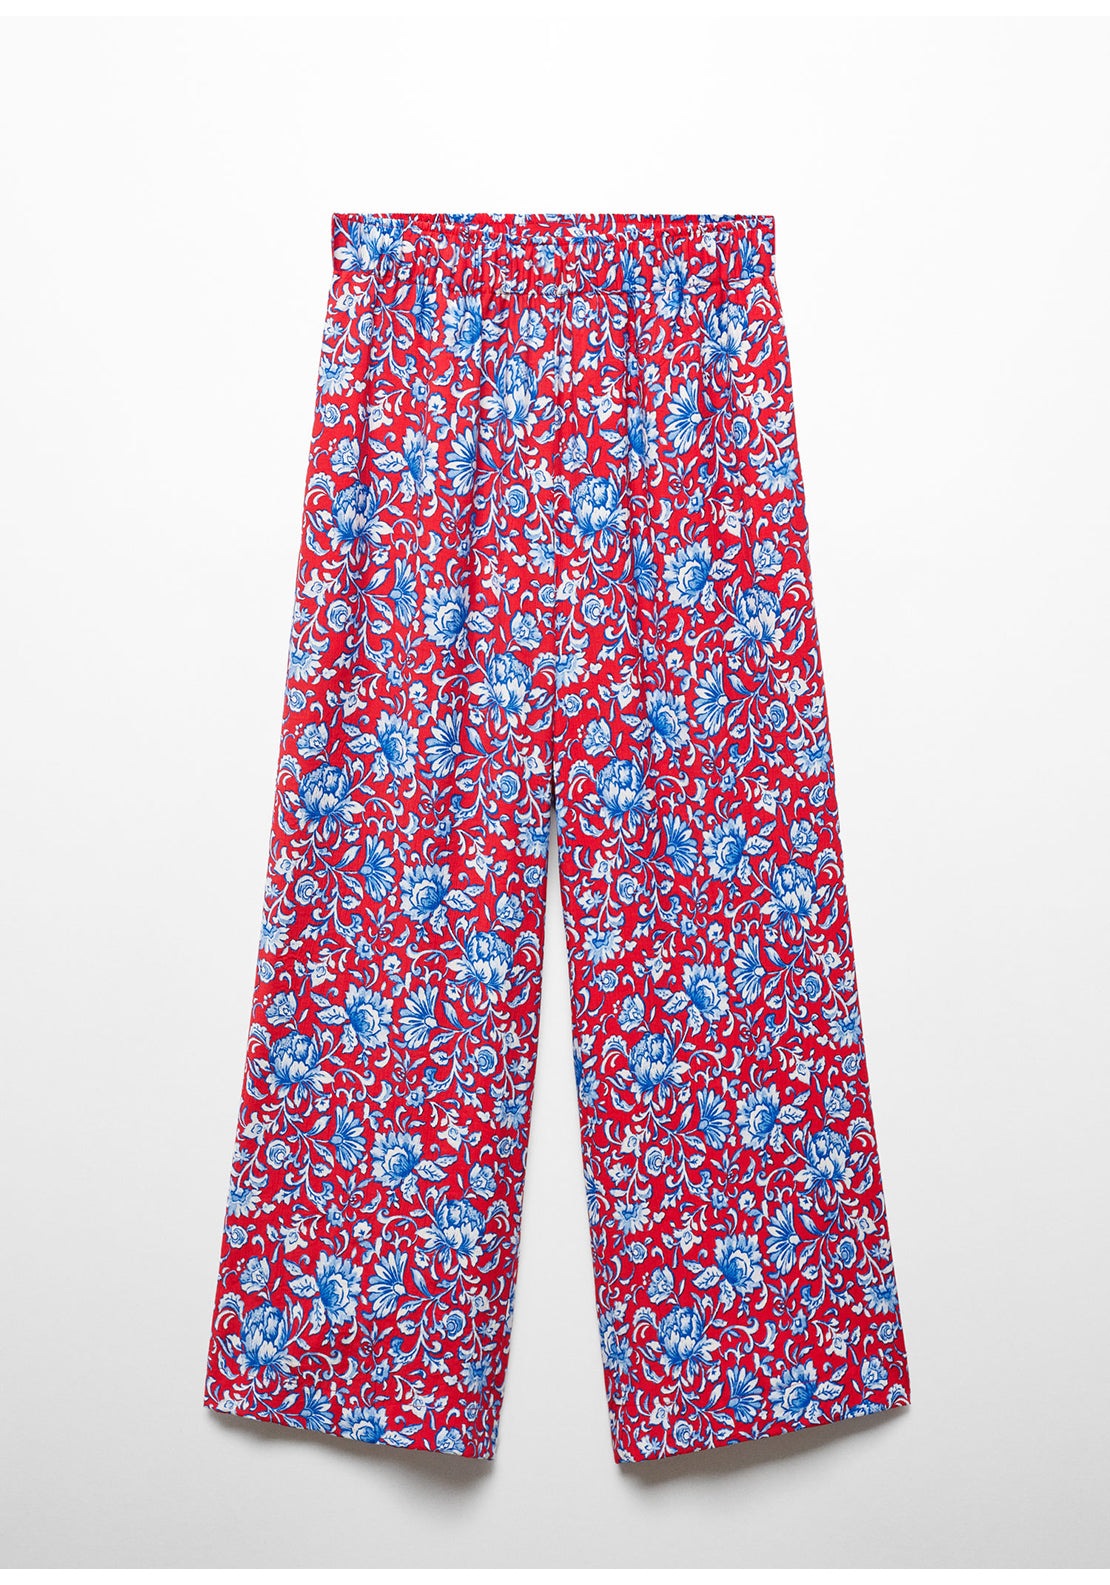 Mango Floral print culotte trousers 7 Shaws Department Stores